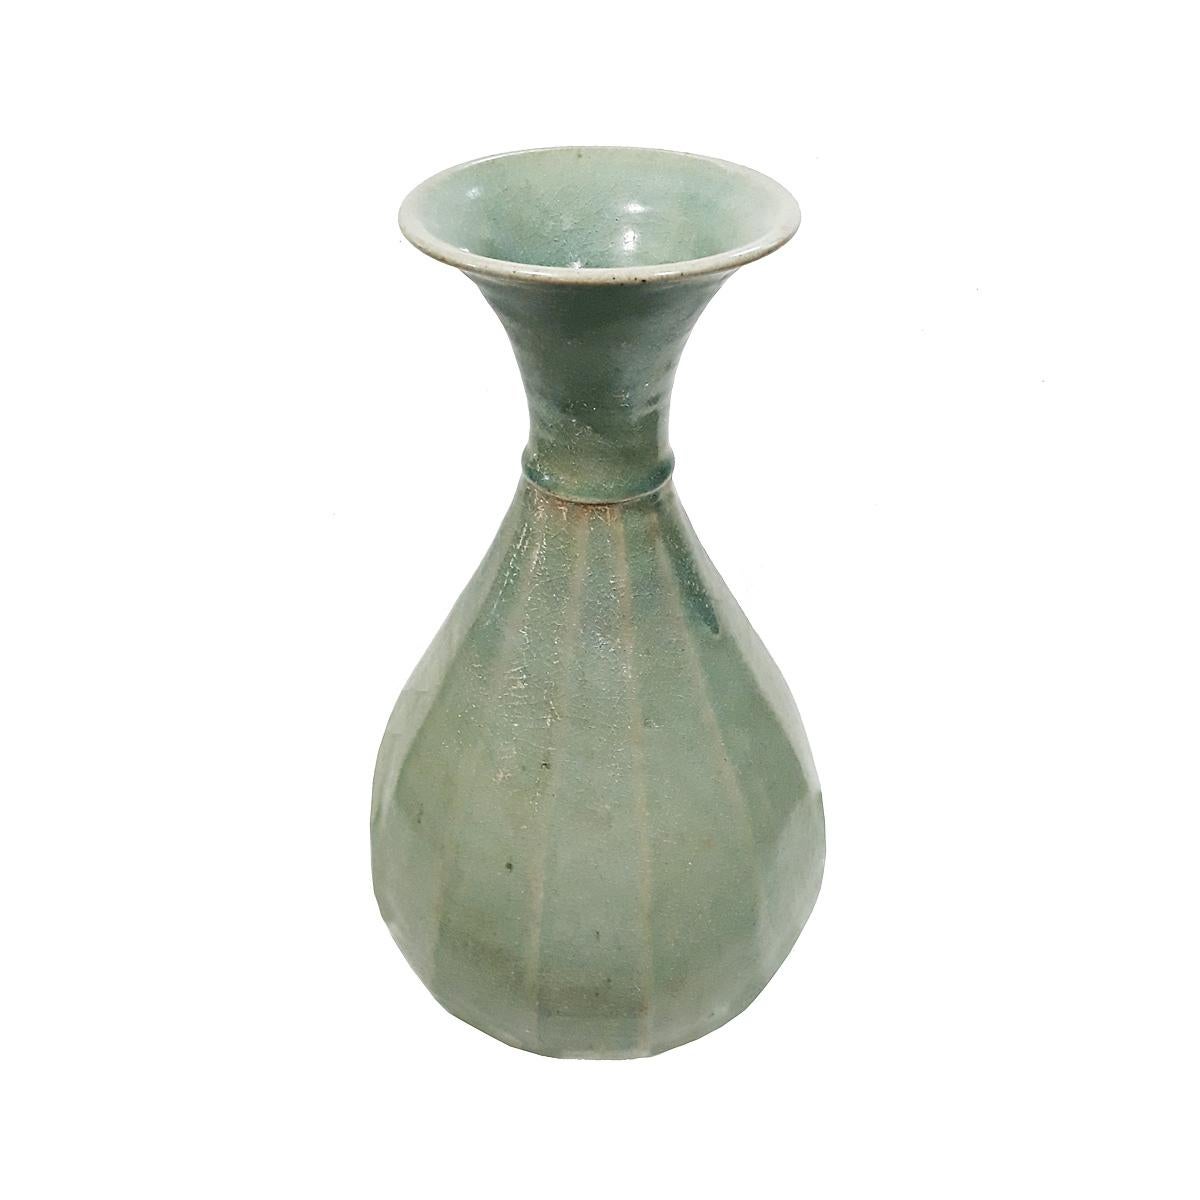 A hand-made ceramic vase from Thailand, Mid-20th Century. Ribbed shape, tapered neck, classic Celadon green crackle finish.